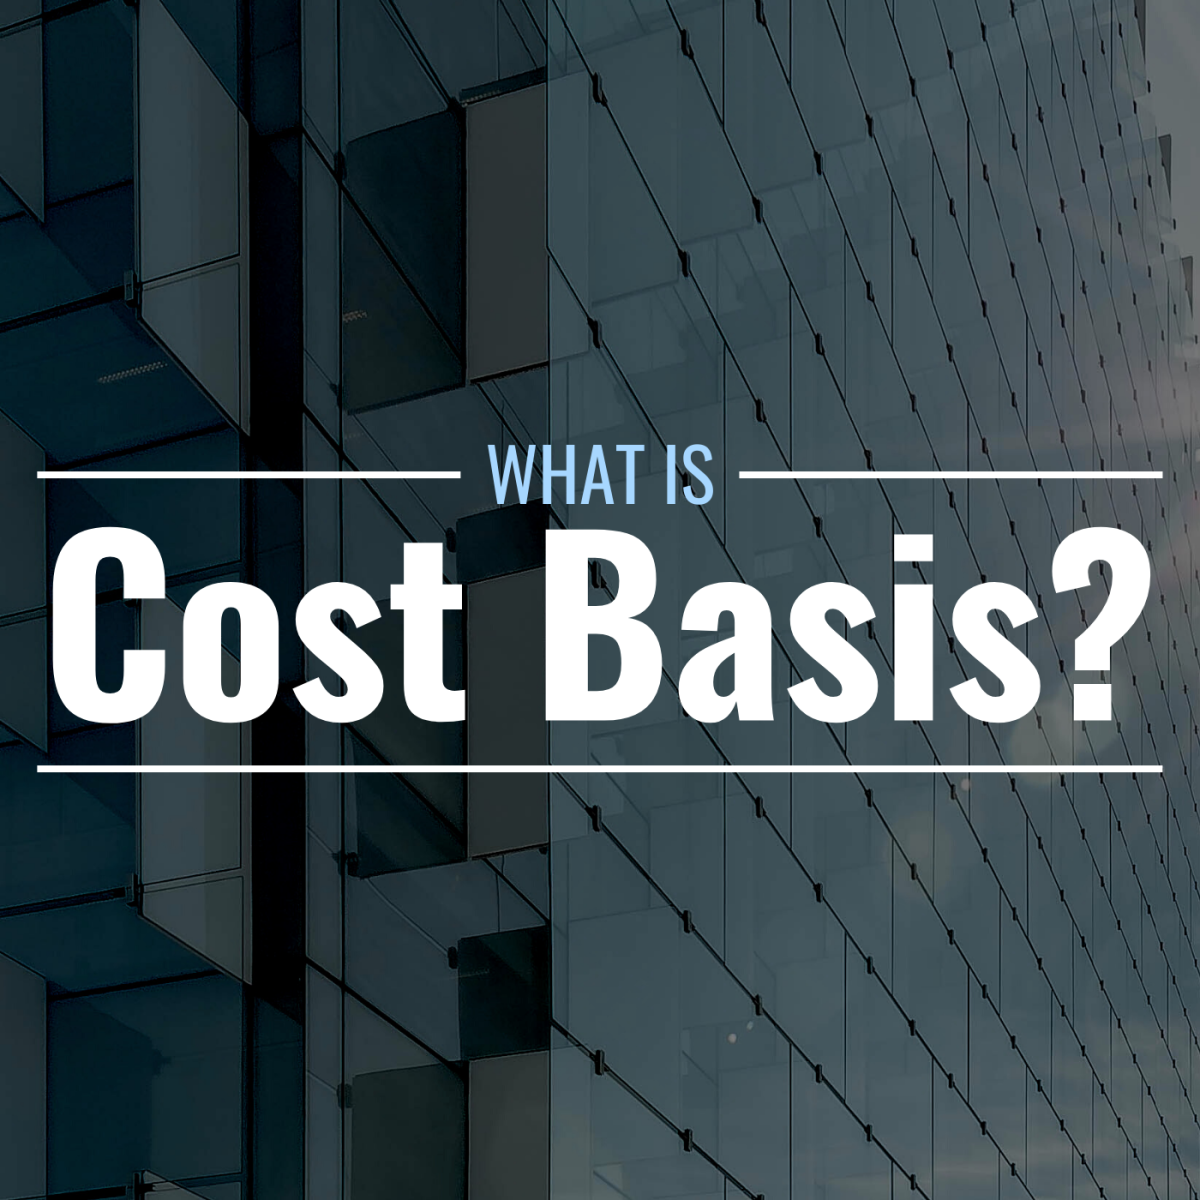 Darkened photo of the side of a tall building with text overlay that reads "What Is Cost Basis?"